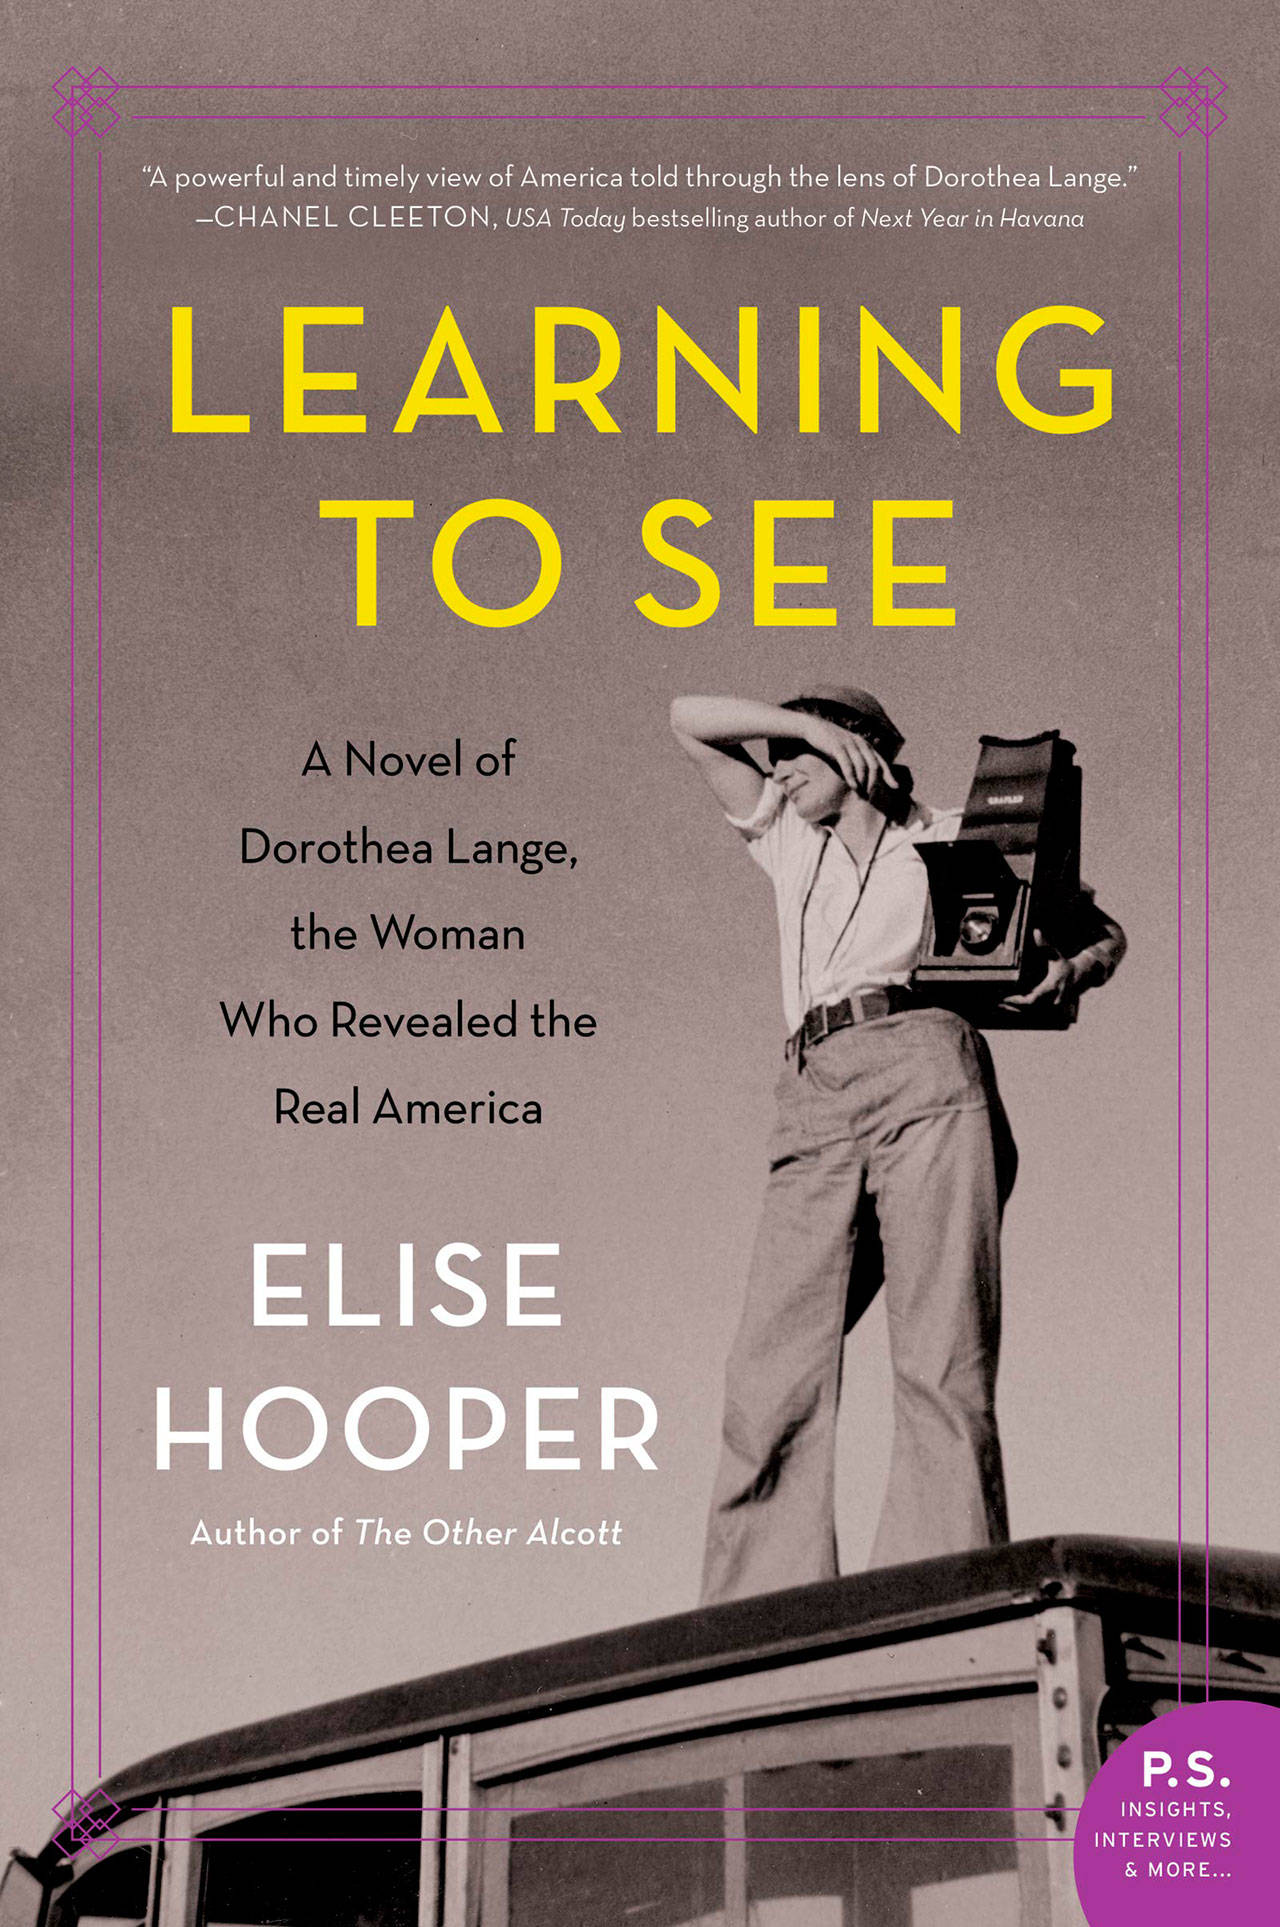 Image courtesy of Eagle Harbor Book Company | Seattle author Elise Hooper (“The Other Alcott”) will visit Eagle Harbor Book Company to discuss her new historical novel “Learning to See: A Novel of Dorothea Lange, the Woman who Revealed the Real America” at 6:30 p.m. Thursday, Jan. 24.